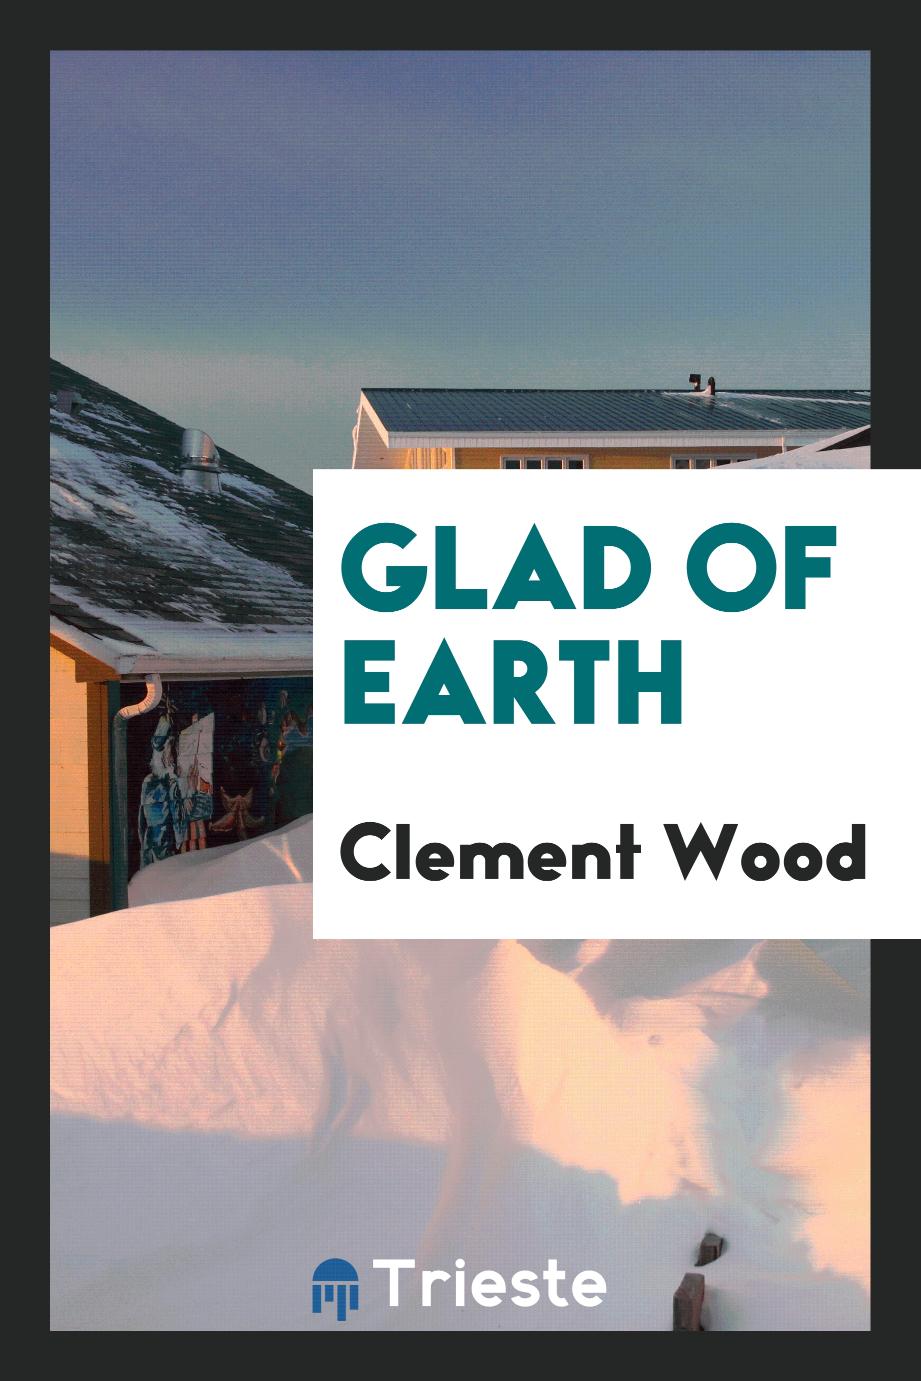 Glad of Earth